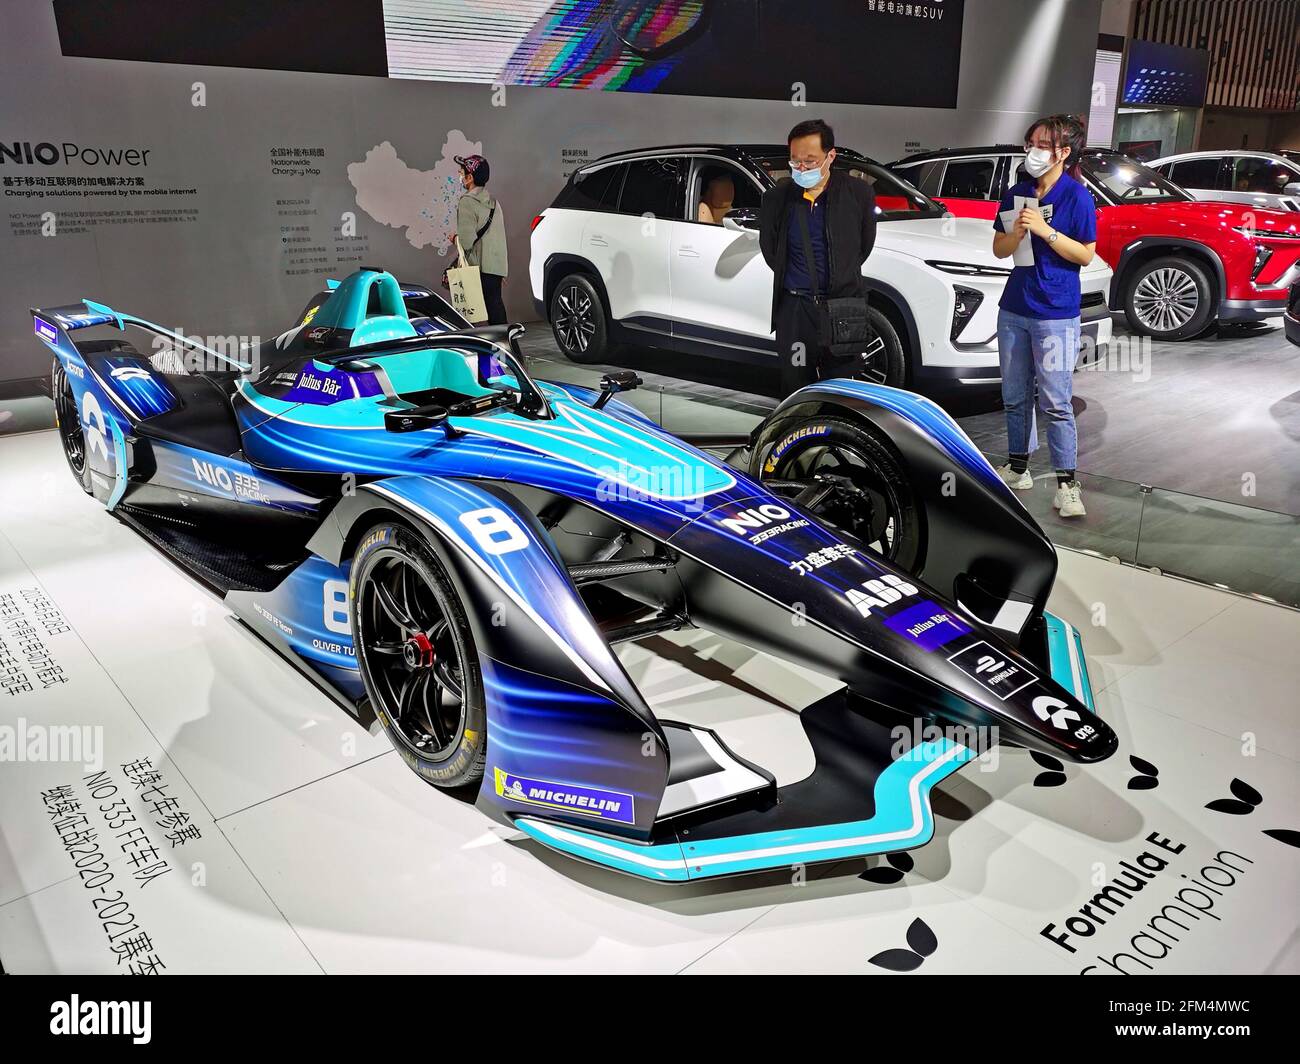 The new energy automobiles are showed in the 2021 Nanjing International Automobile Expo in Nanjing,Jiangsu,China on 30th April, 2021.(Photo by TPG/cnsphotos) Stock Photo